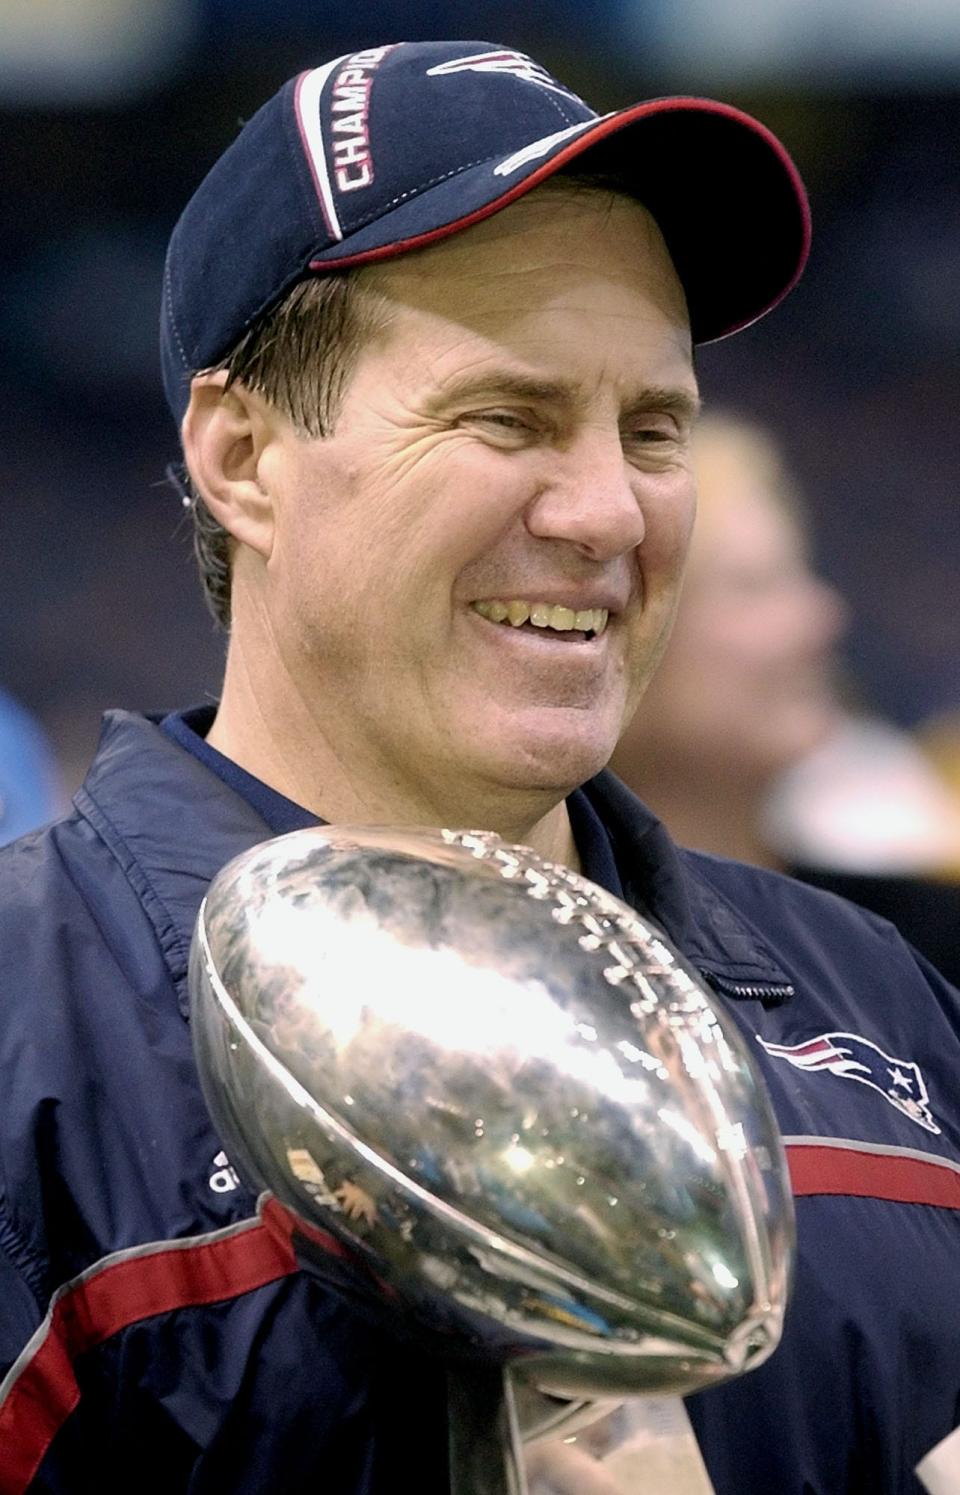 New England Patriots' coach Bill Belichick holds the Super Bowl trophy after the Patriots beat the St. Louis Rams, 20-17, in Super Bowl XXXVI at the Louisiana Superdome in 2002.